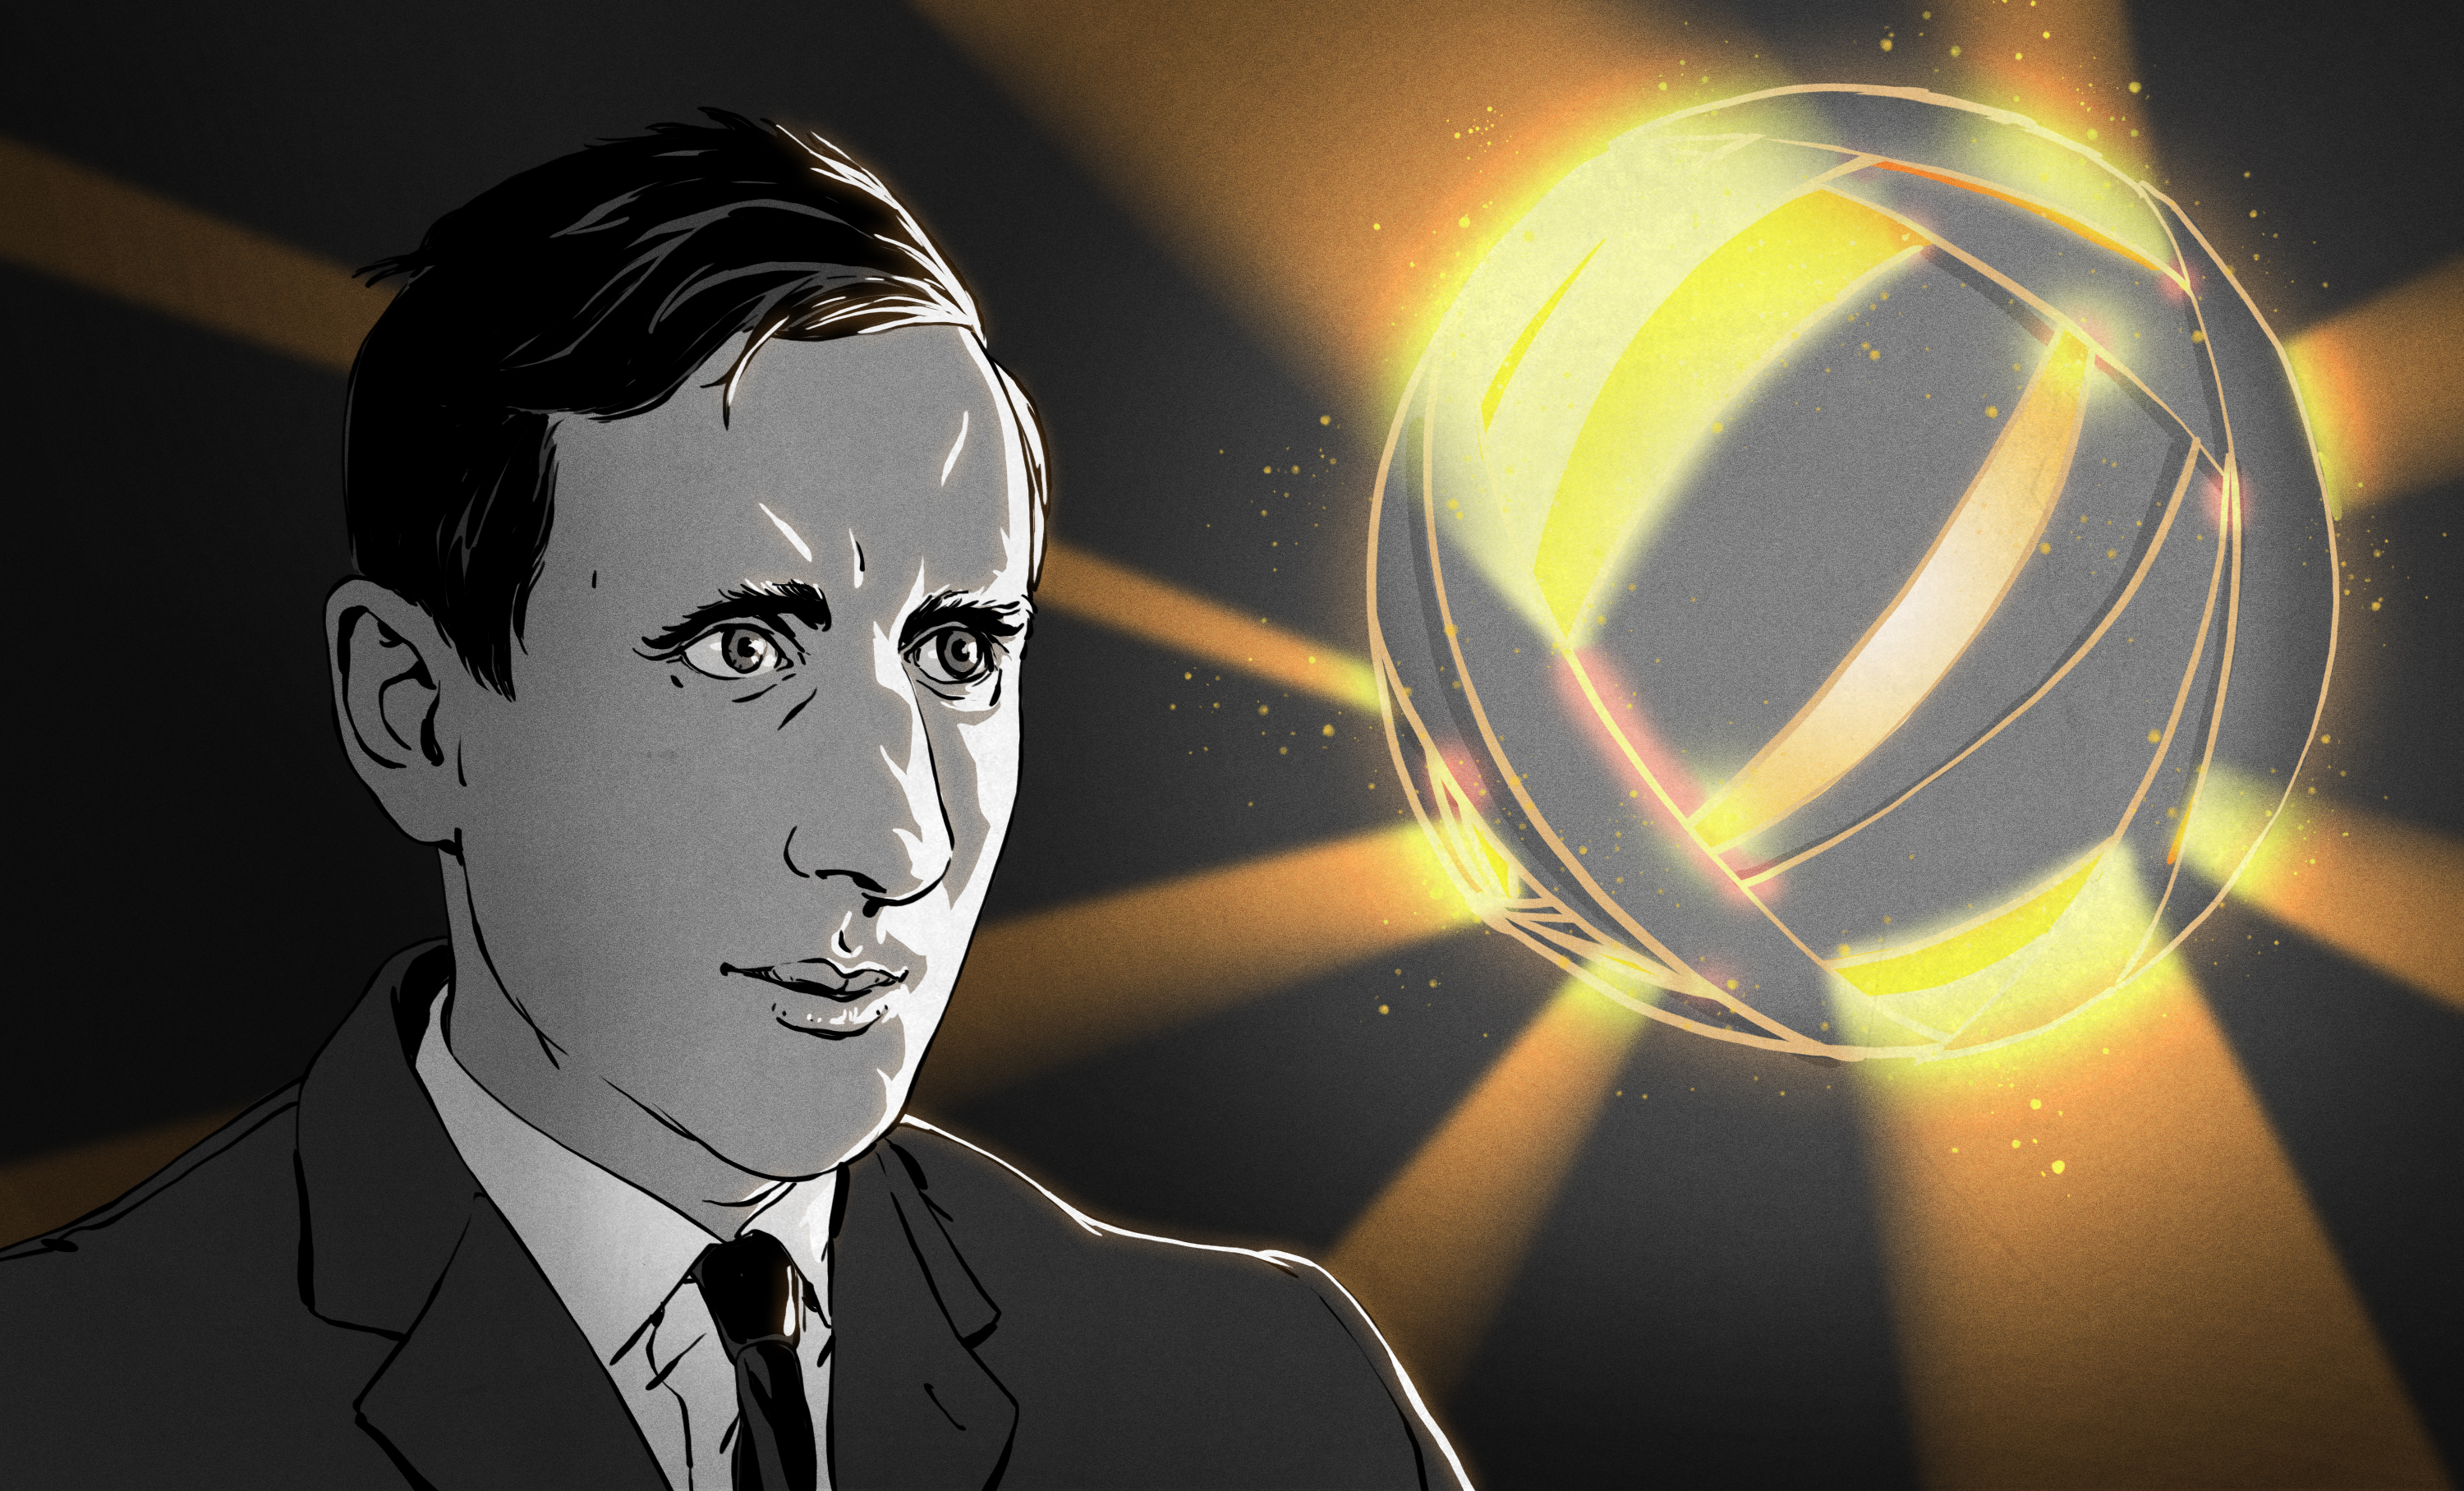 The Legacy Of One Of Science's Stars: Freeman Dyson |